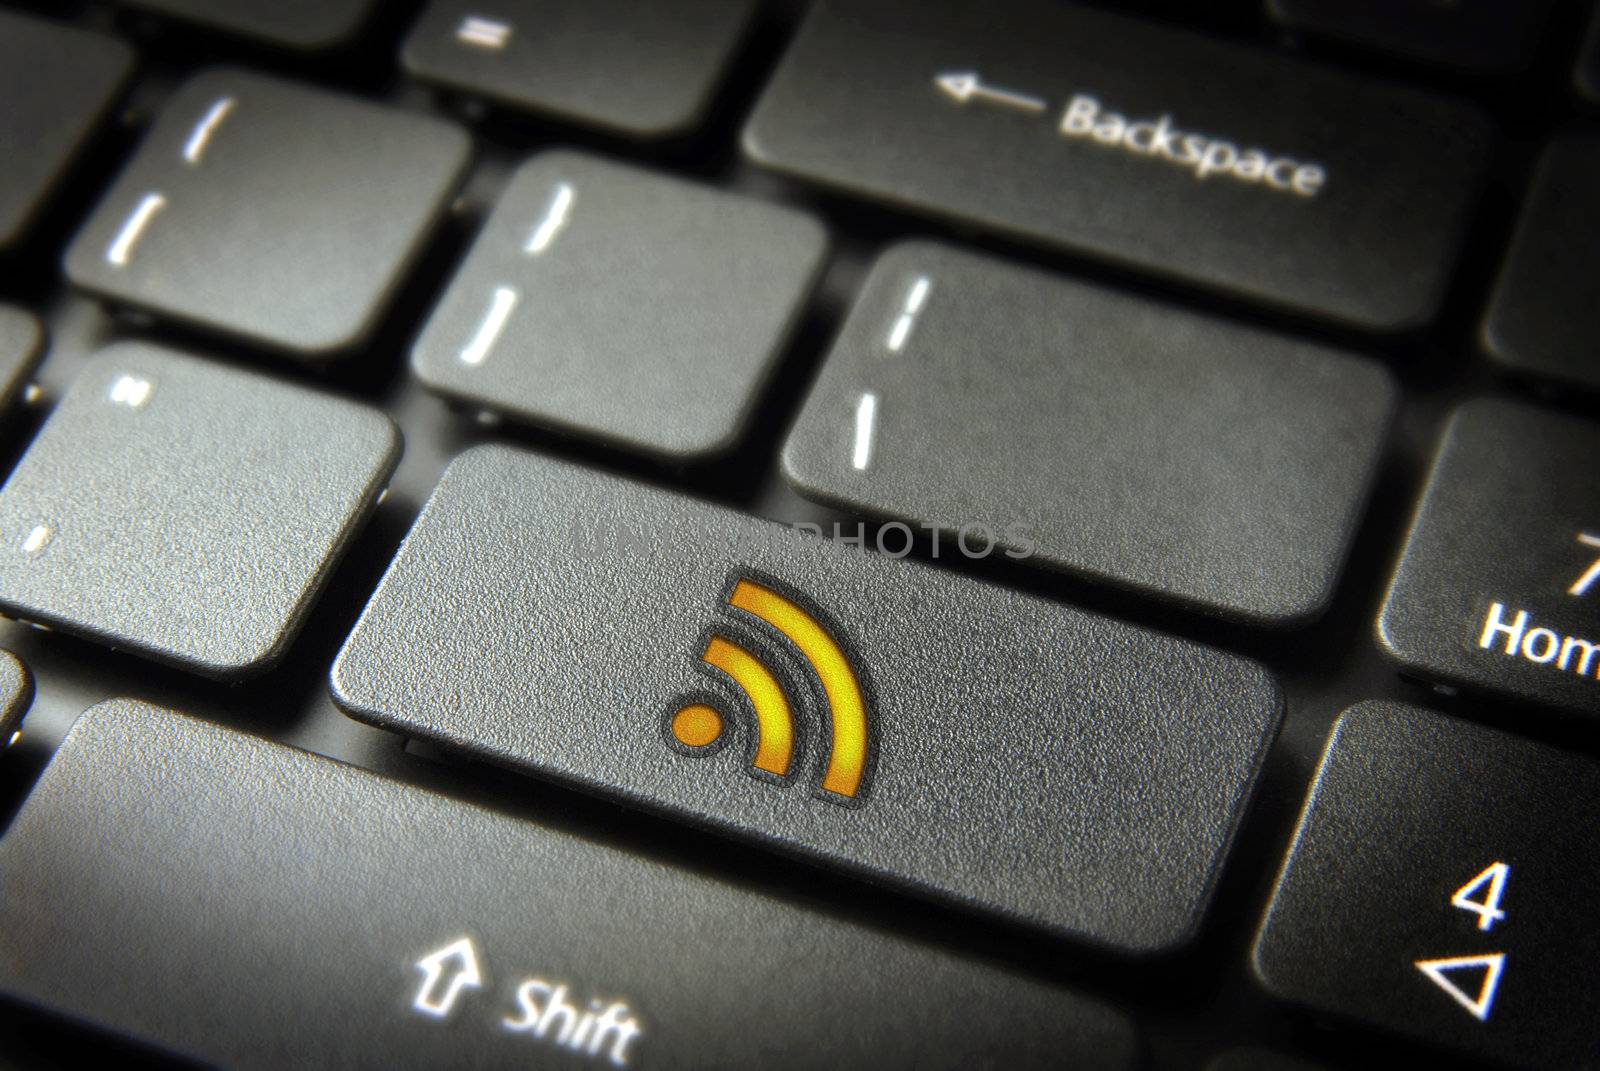 Golden technology RSS icon key on laptop keyboard. Included clipping path, so you can easily edit it.